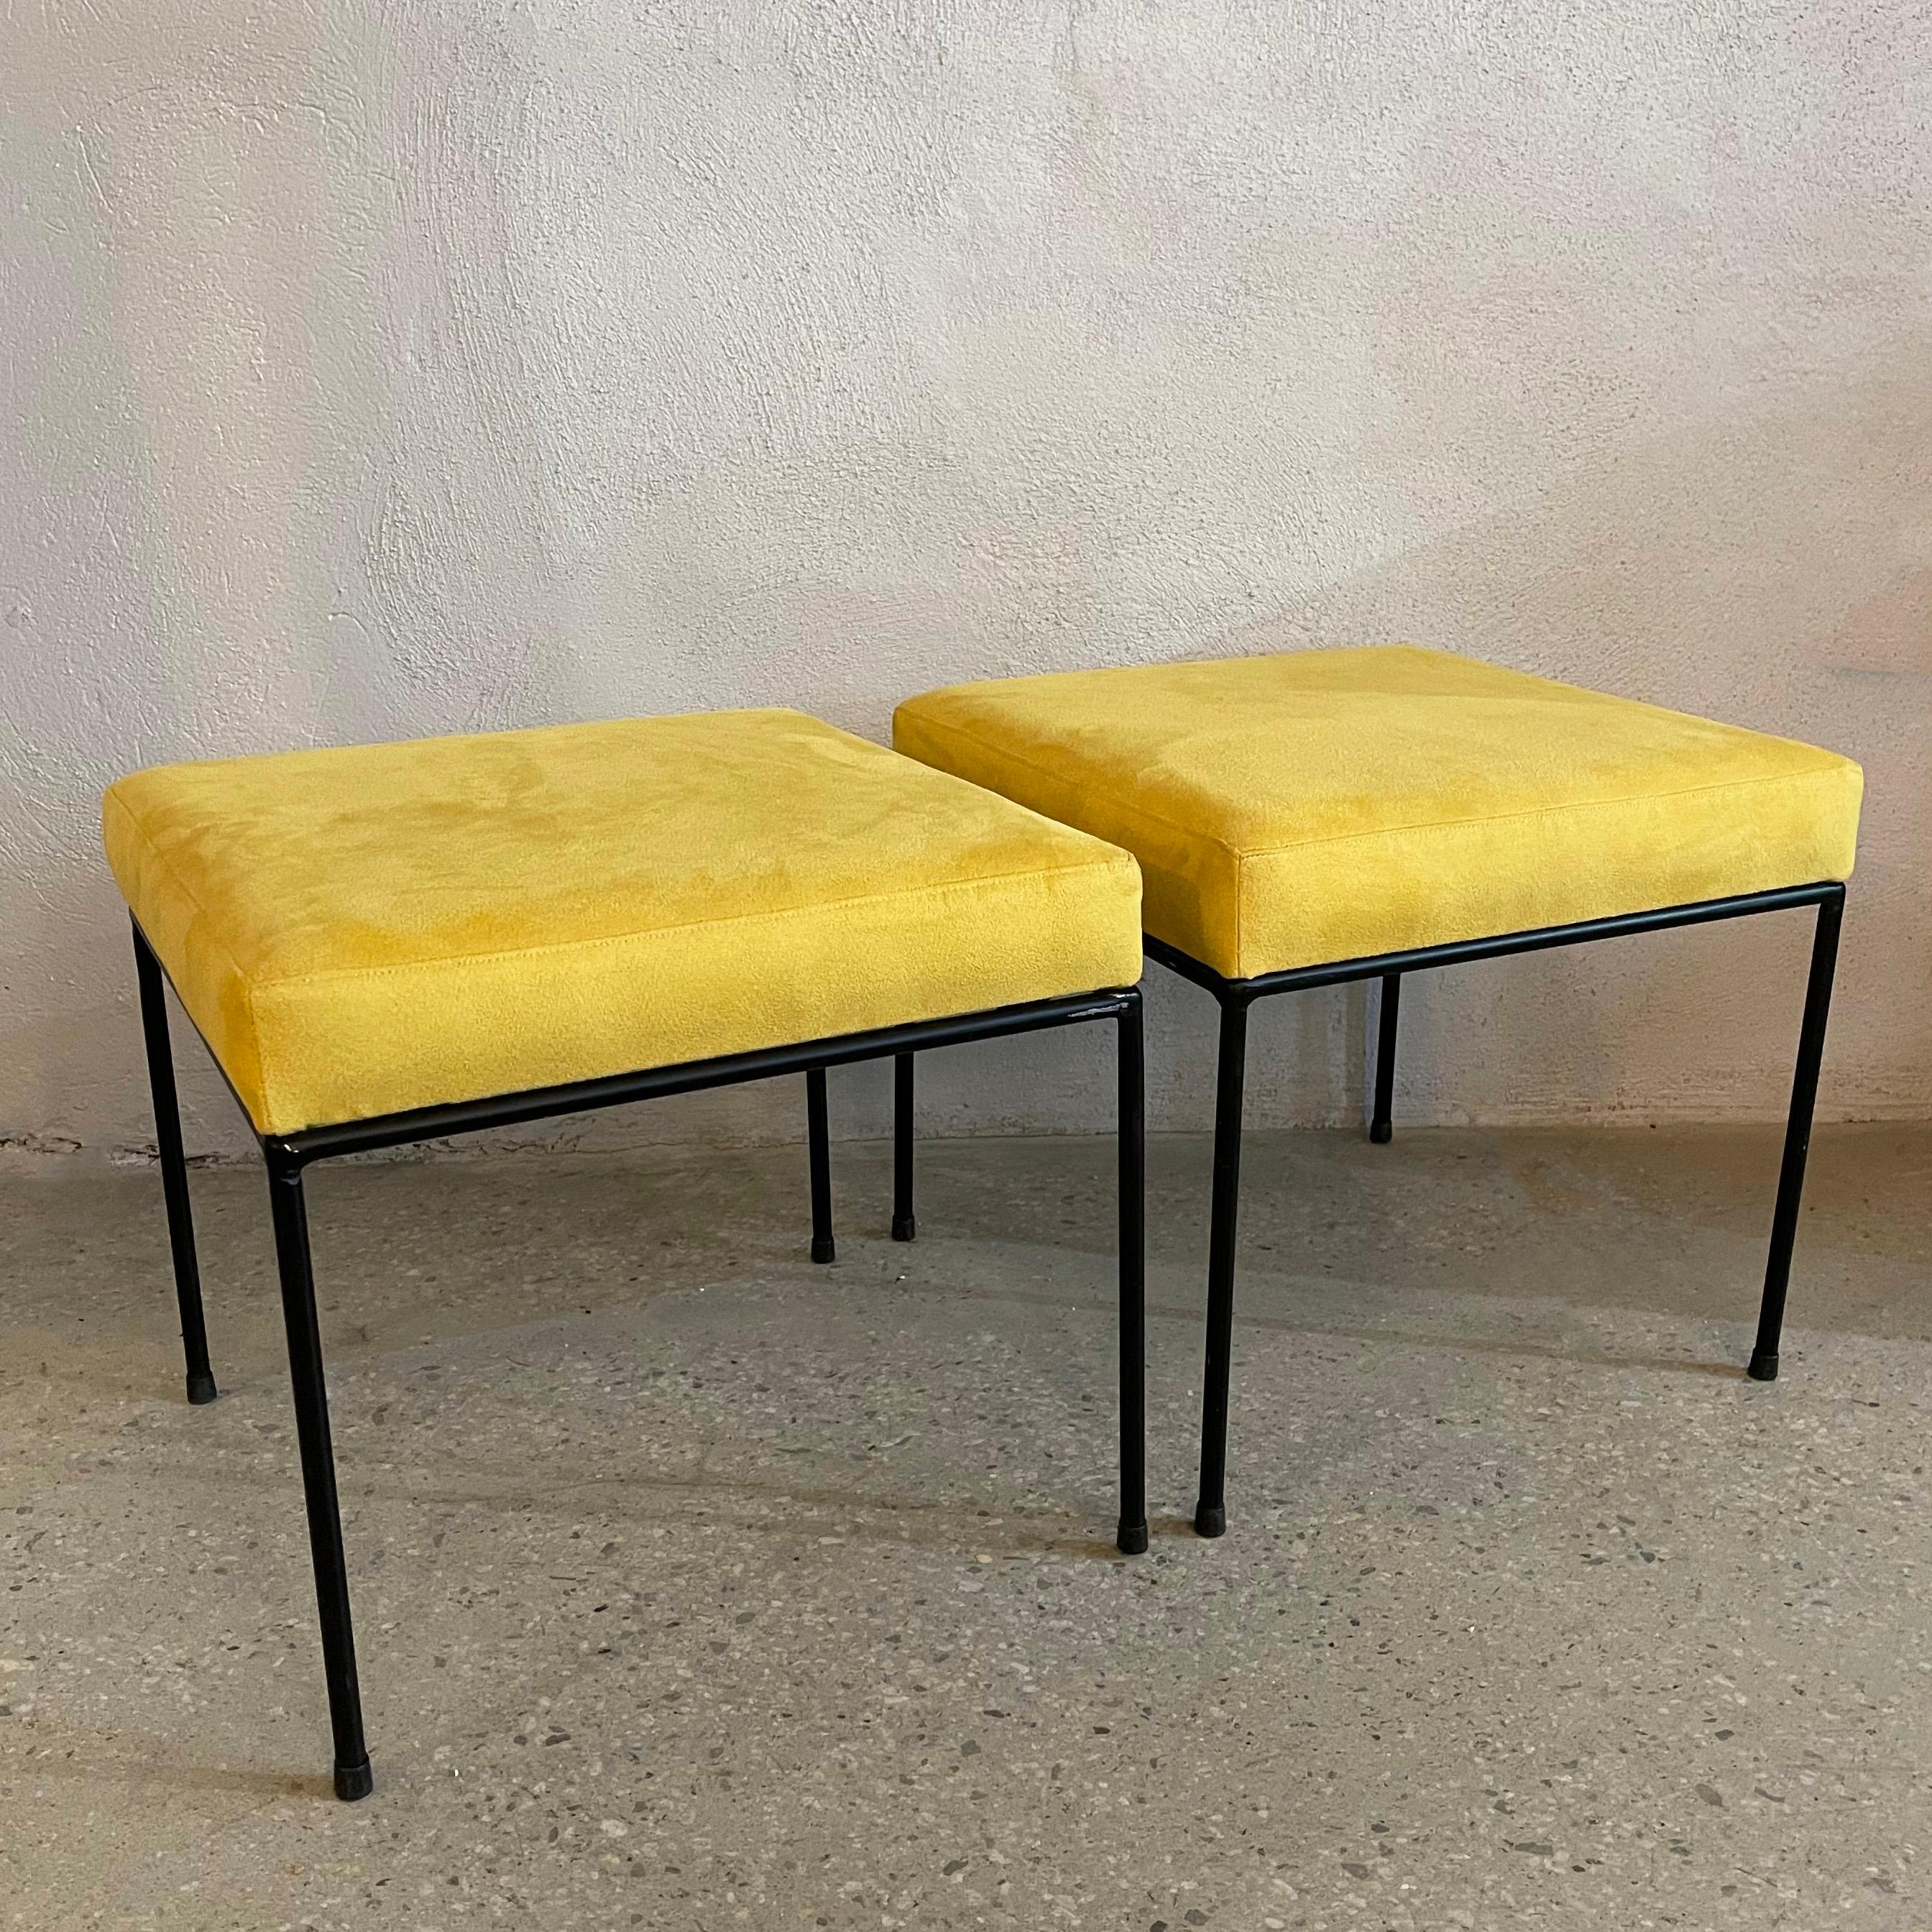 American Minimal Mid-Century Modern Wrought Iron And Ultrasuede Ottomans